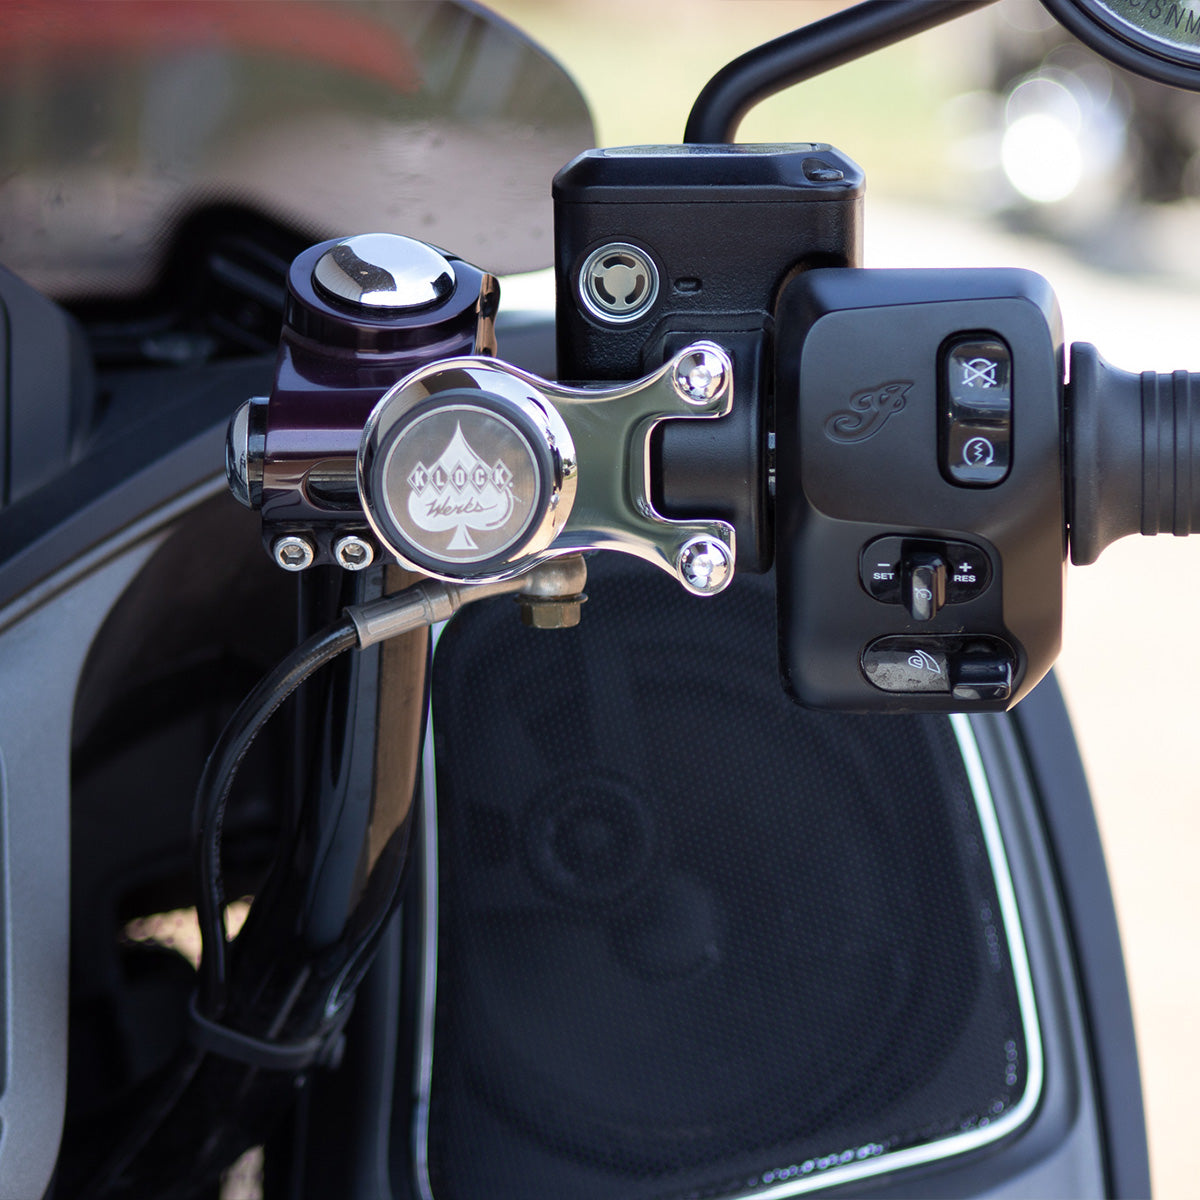 Chrome Ambidextrous Handlebar Magnetic Phone Mount for Indian® Challenger and Pursuit Motorcycles shown on bike(Chrome Ambidextrous Mount on bike)